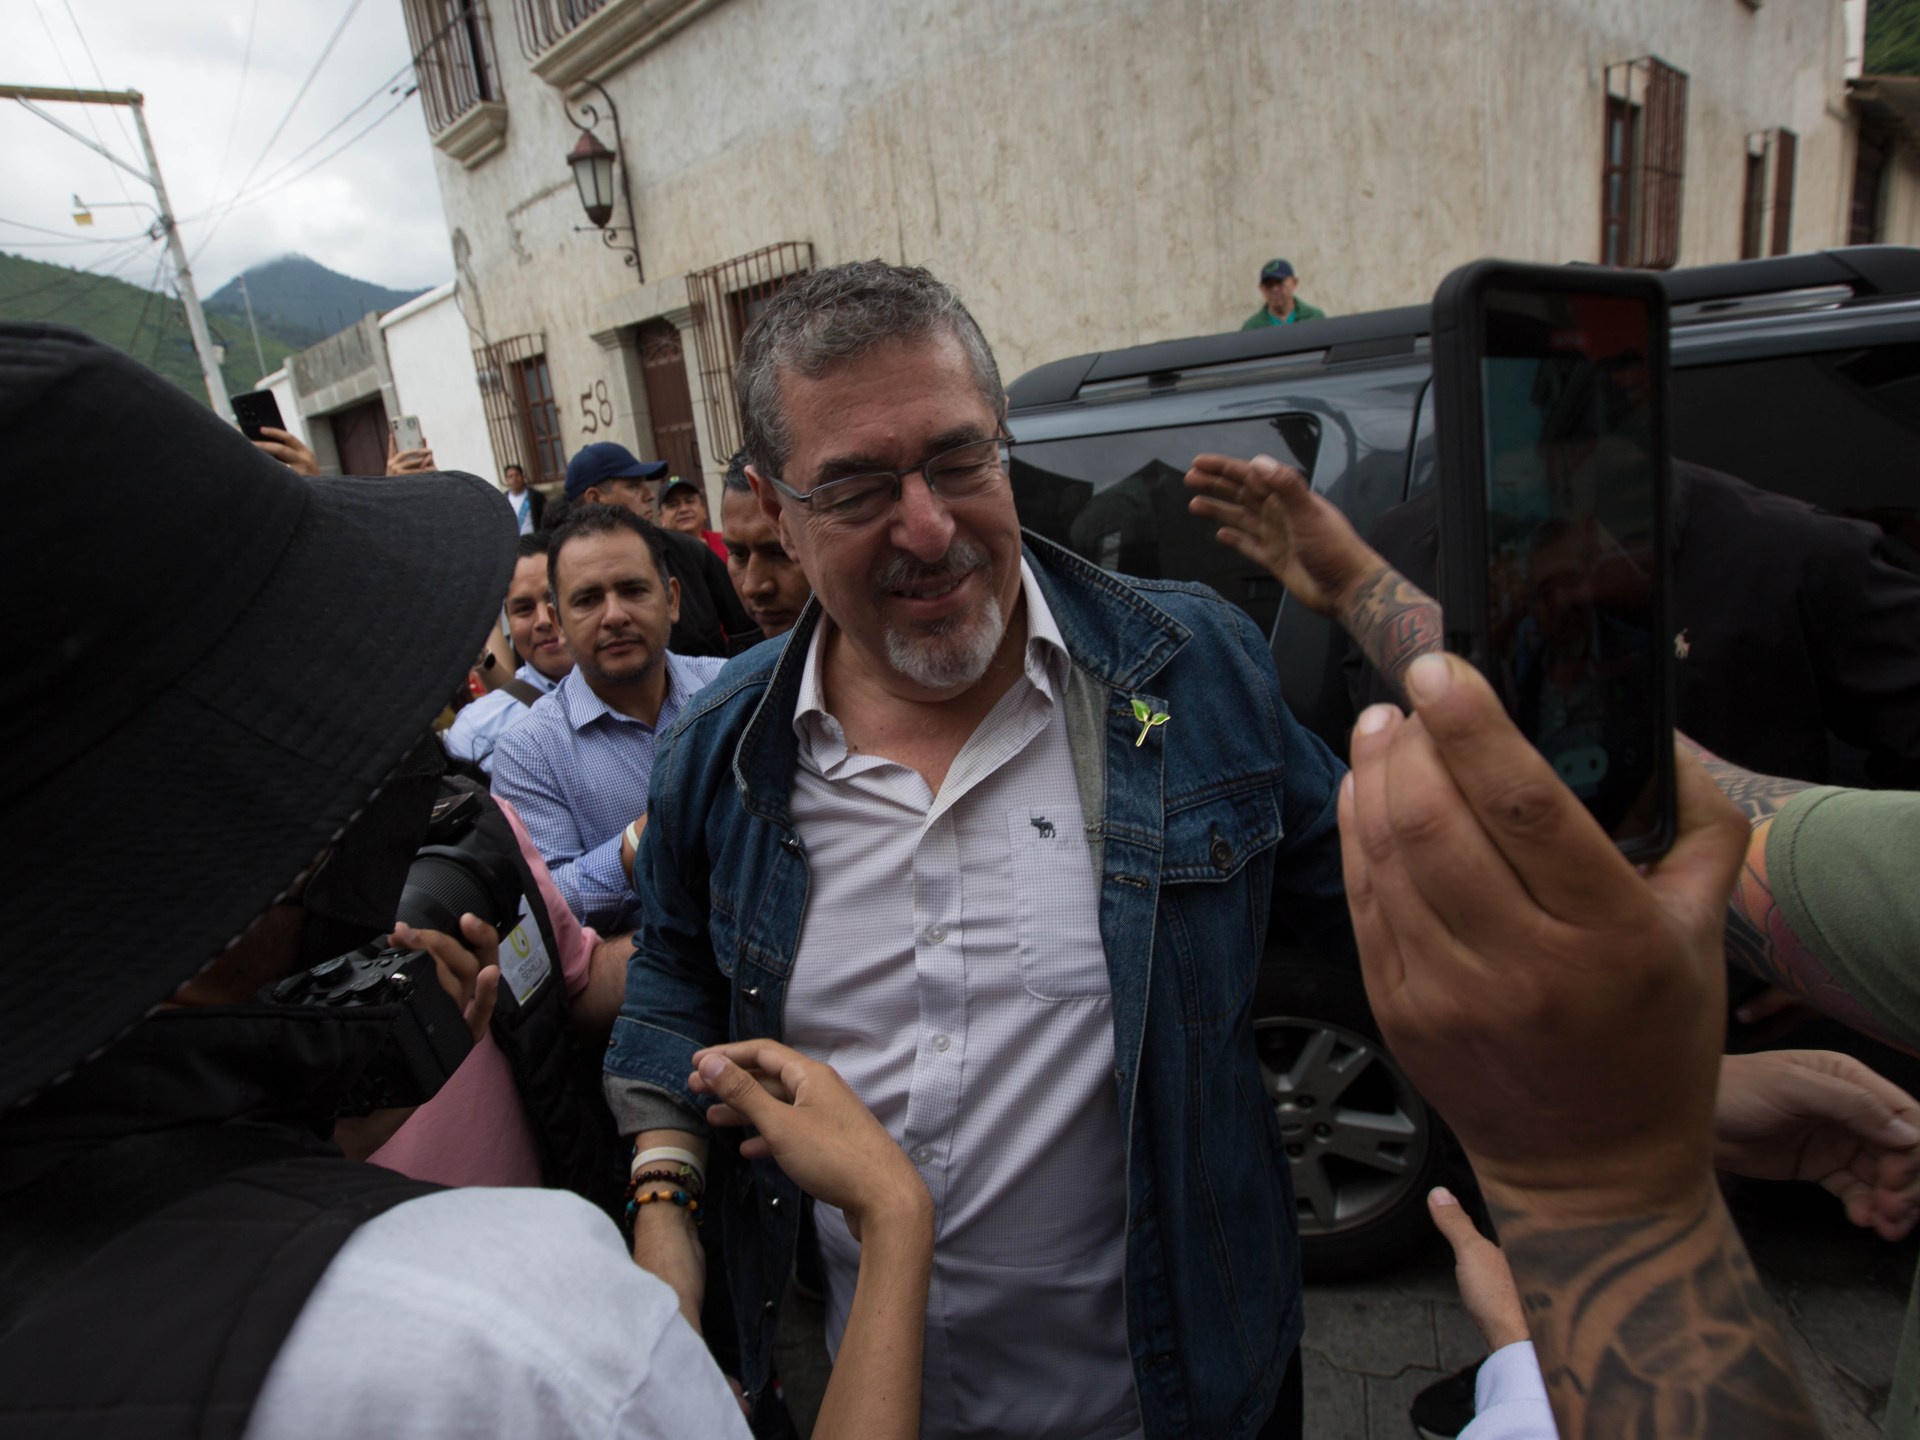 What challenges lie ahead for Guatemala’s President-elect Arevalo?